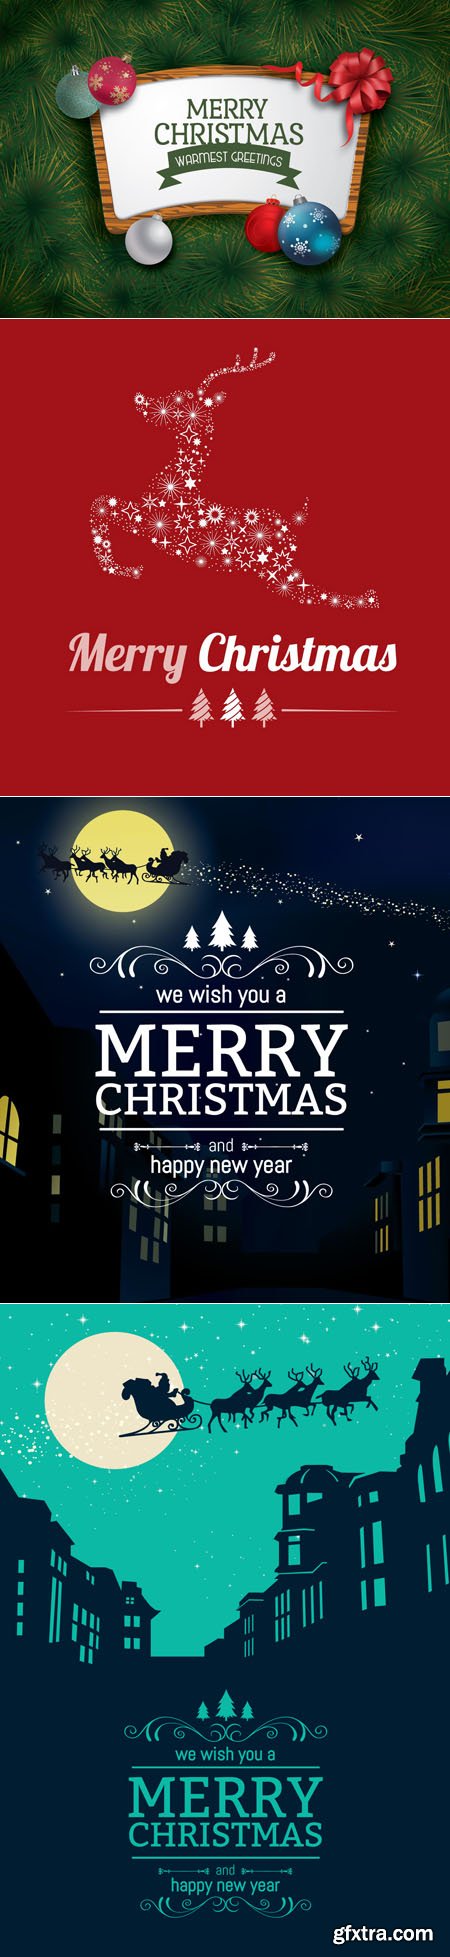 4 Beautiful Merry Christmas Backgrounds in Vector